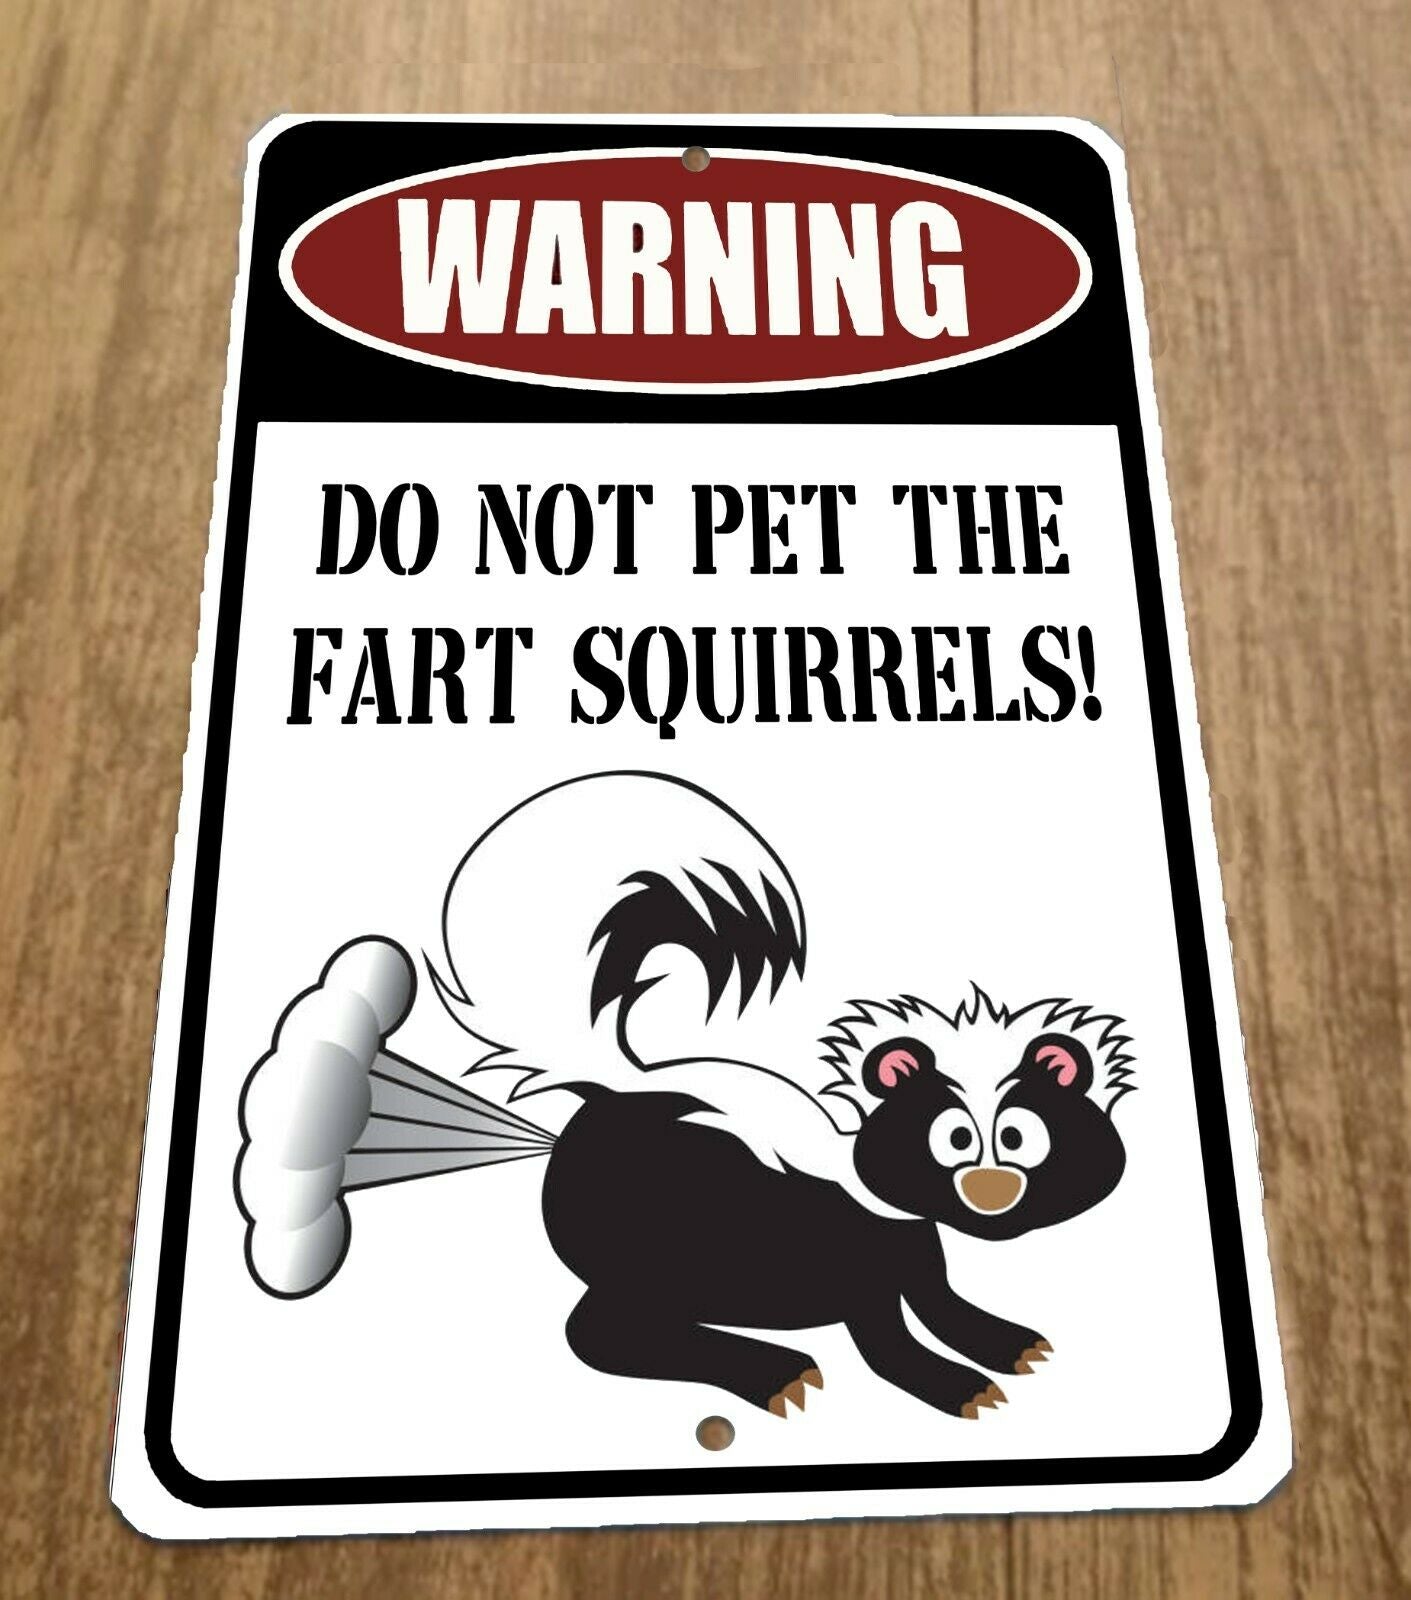 Warning Do Not Pet The Fart Squirrels Skunk 8x12 Metal Wall Animal Sign